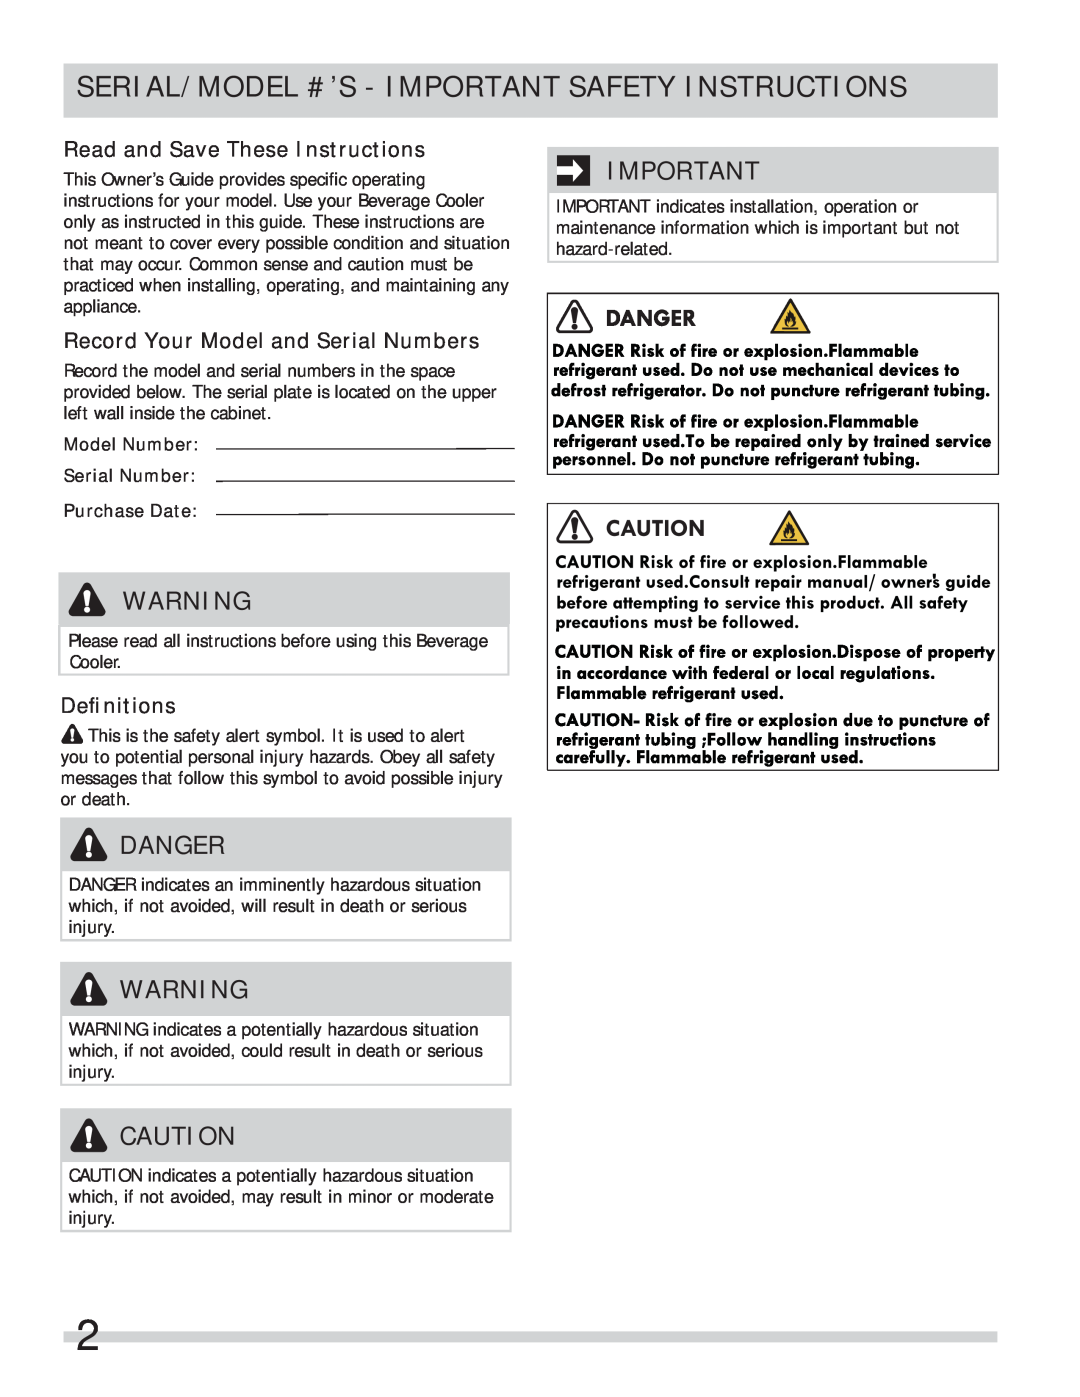 Frigidaire MODEL #S Serial/Model #’S - Important Safety Instructions, Danger, Read and Save These Instructions, Deﬁnitions 